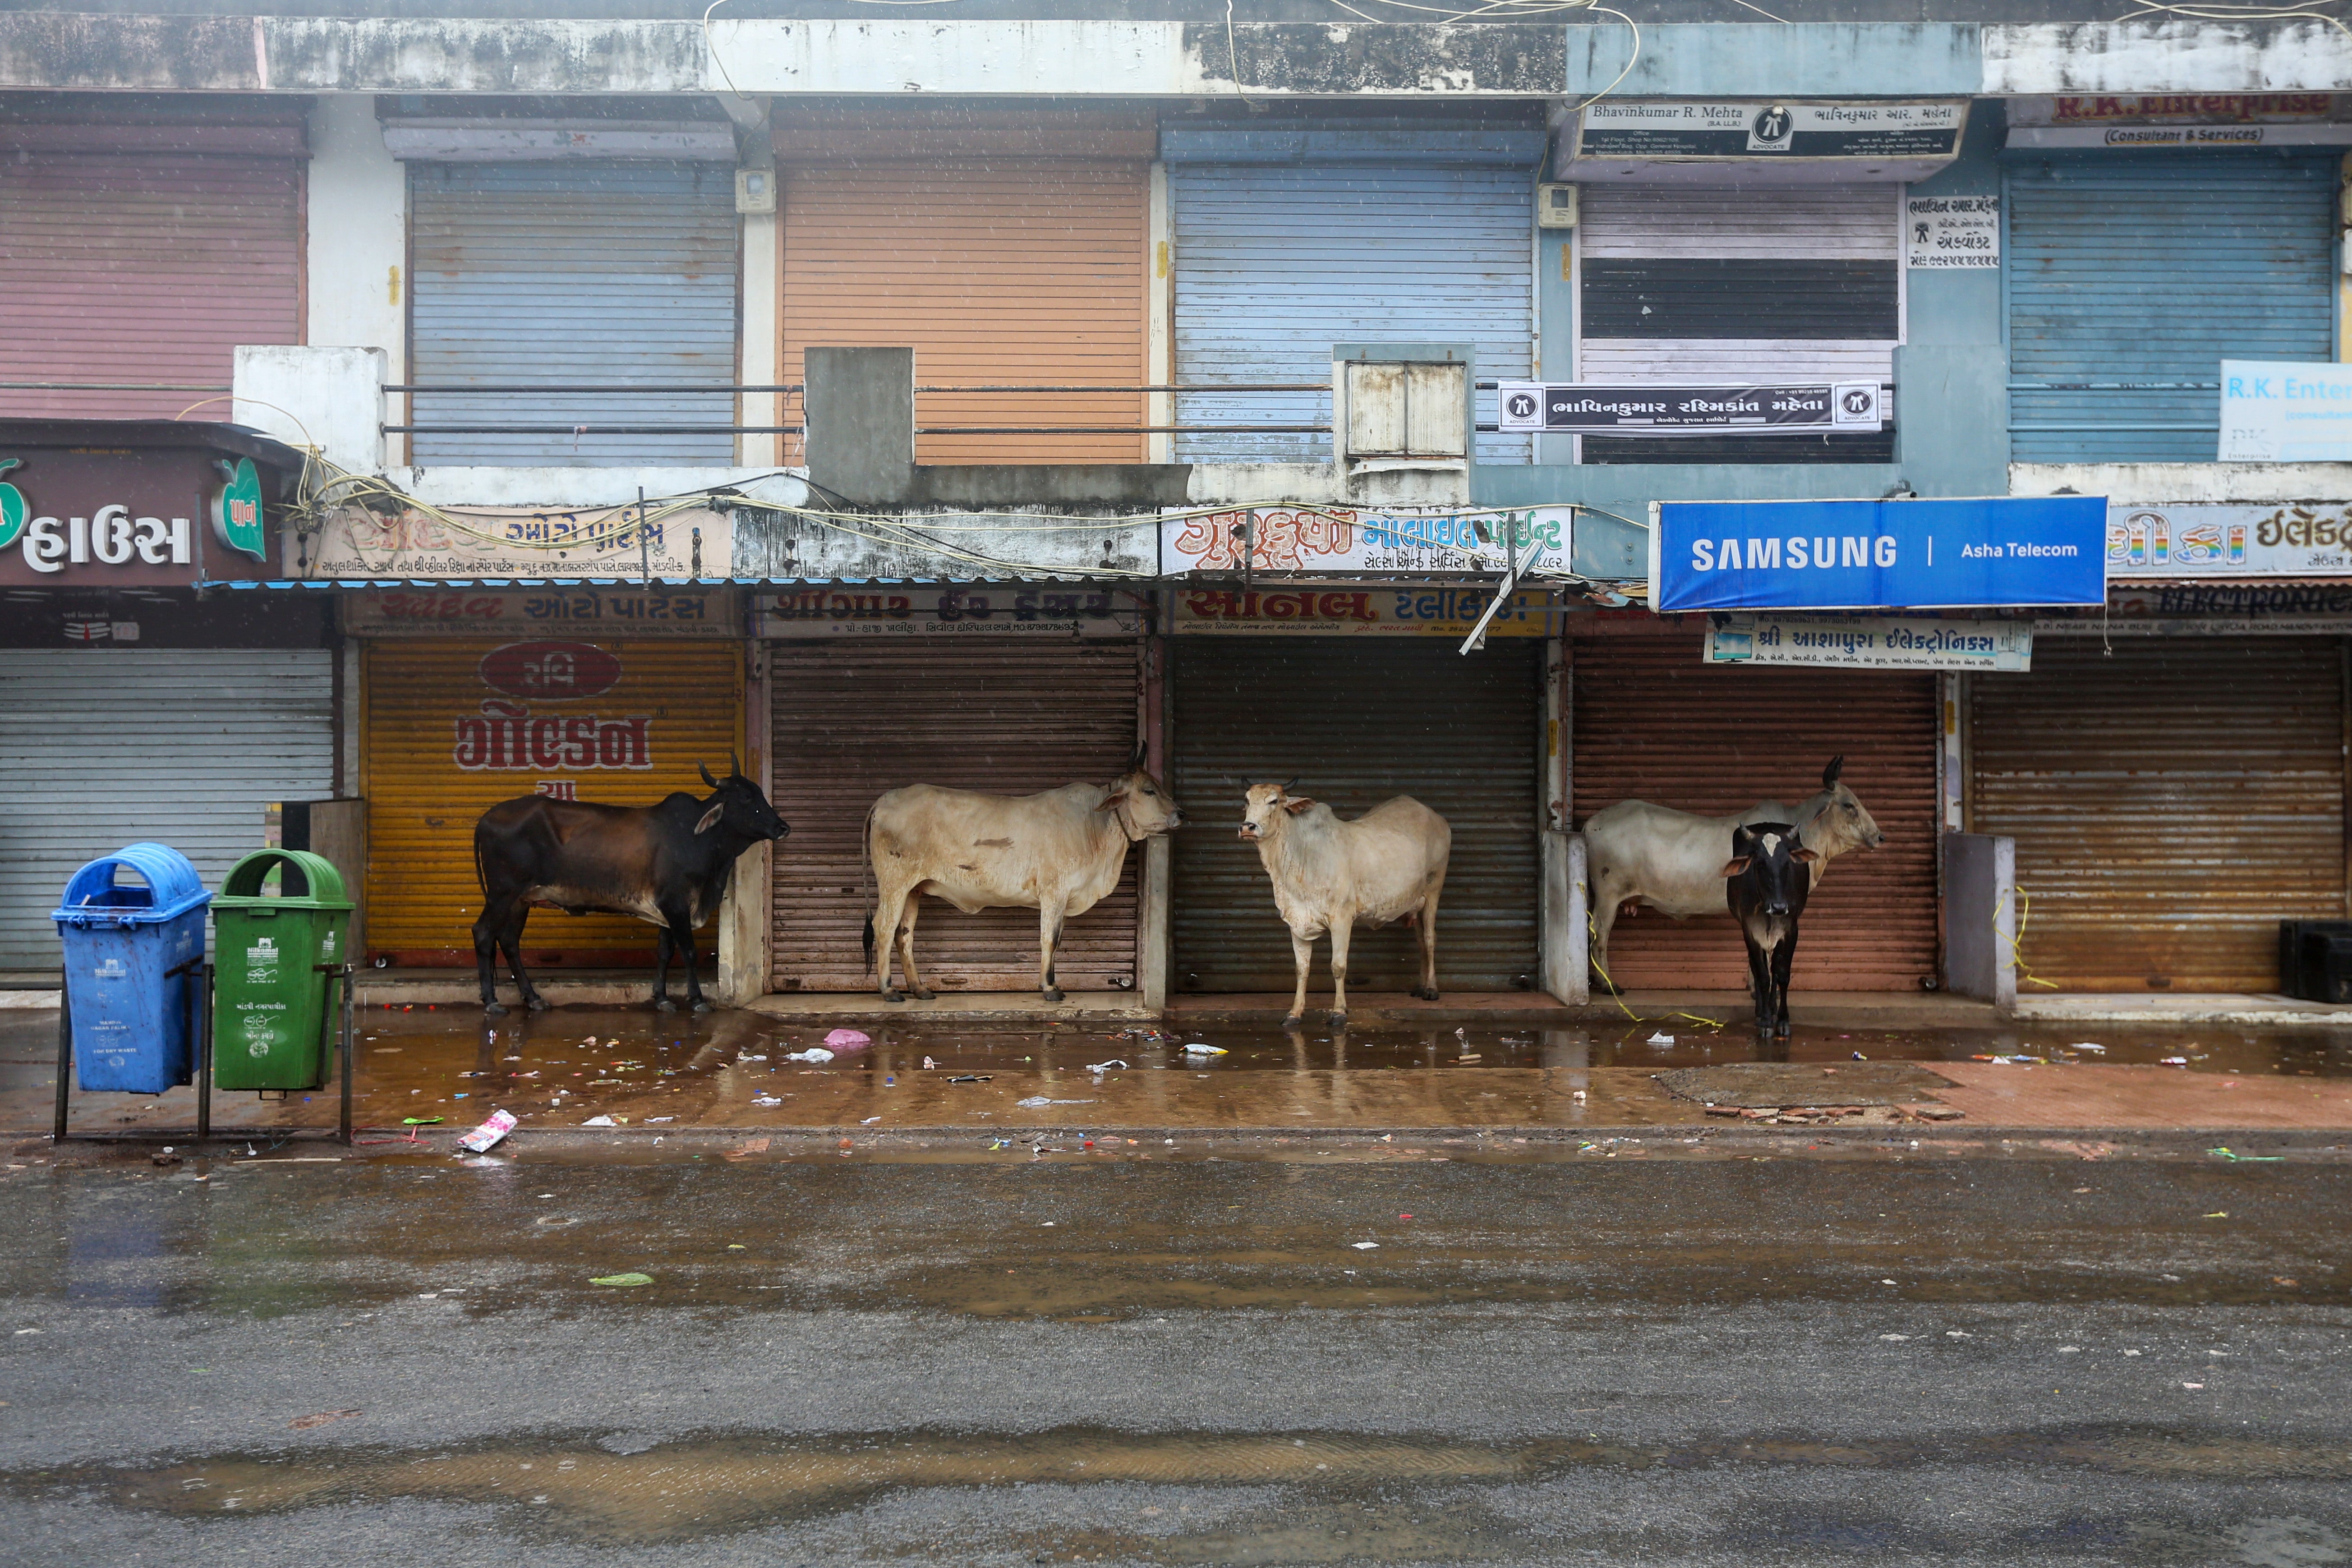 Cows take shelter from rain under the roof of closed shops in Mandvi, Gujarat